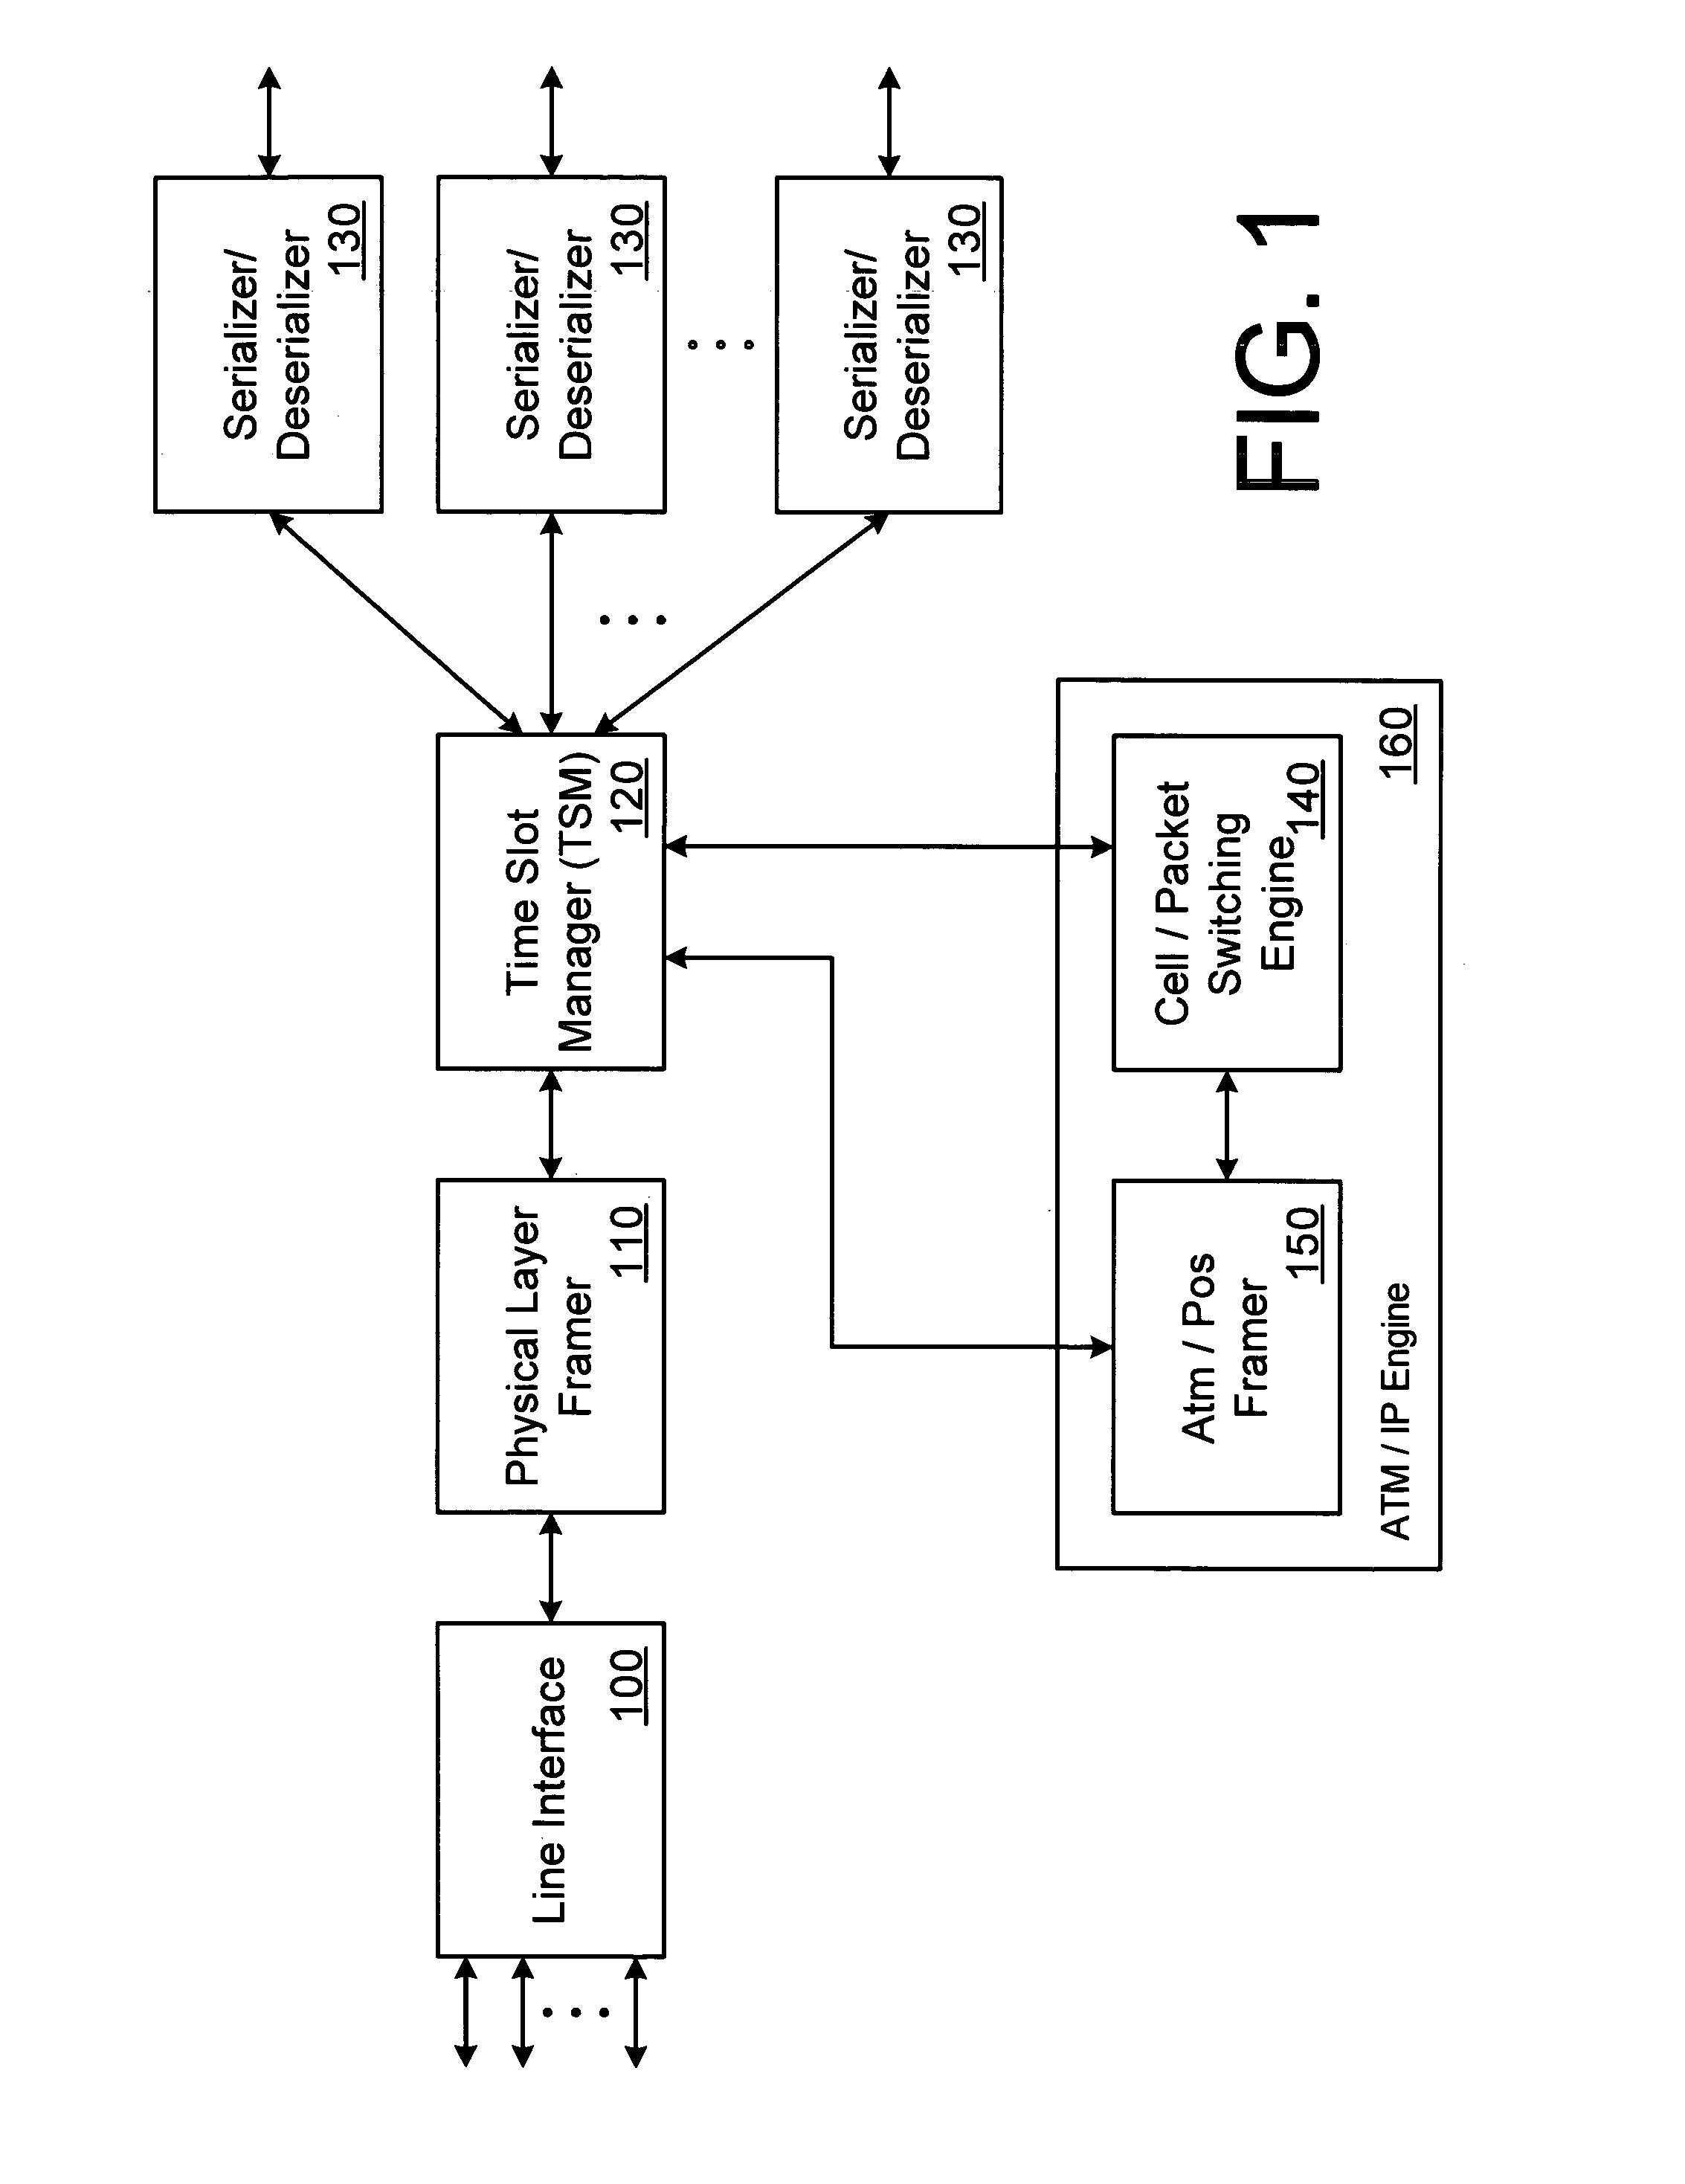 Hybrid time division multiplexing and data transport